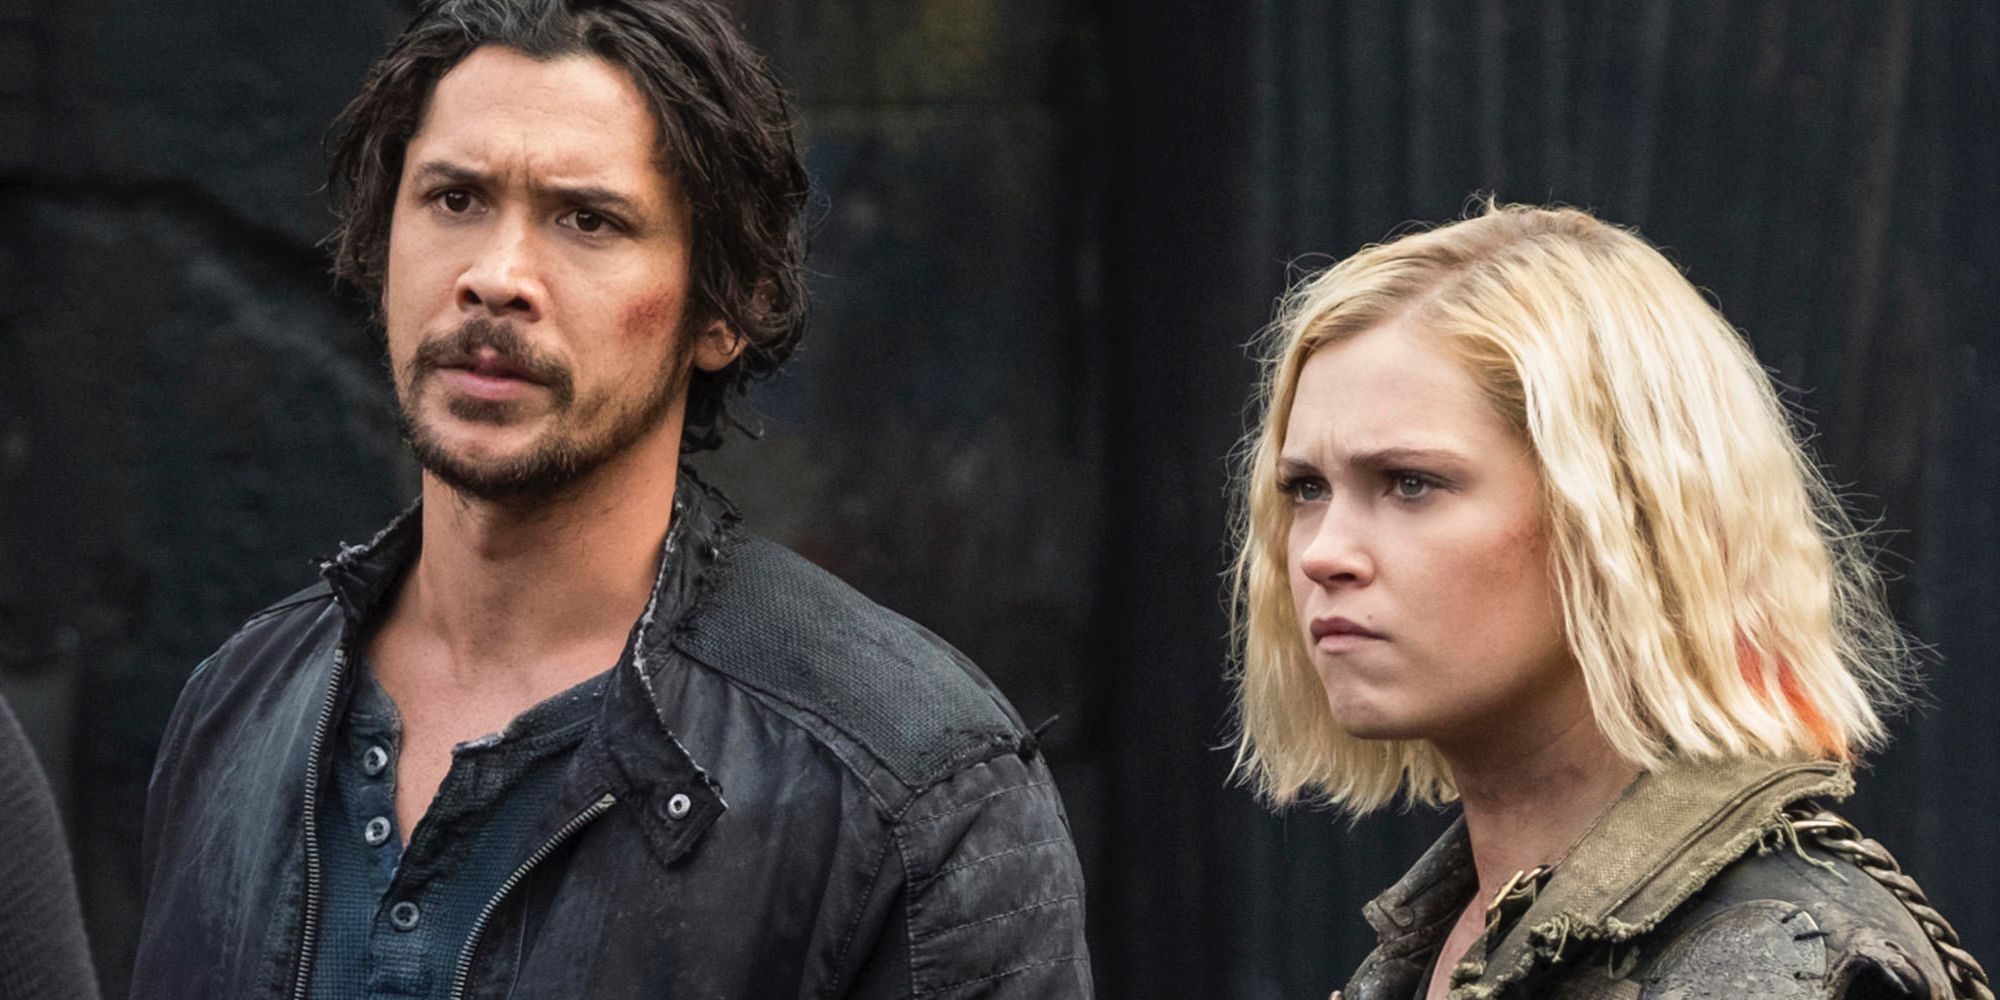 Bob Morley and Eliza Taylor in The 100 Season 6 The CW